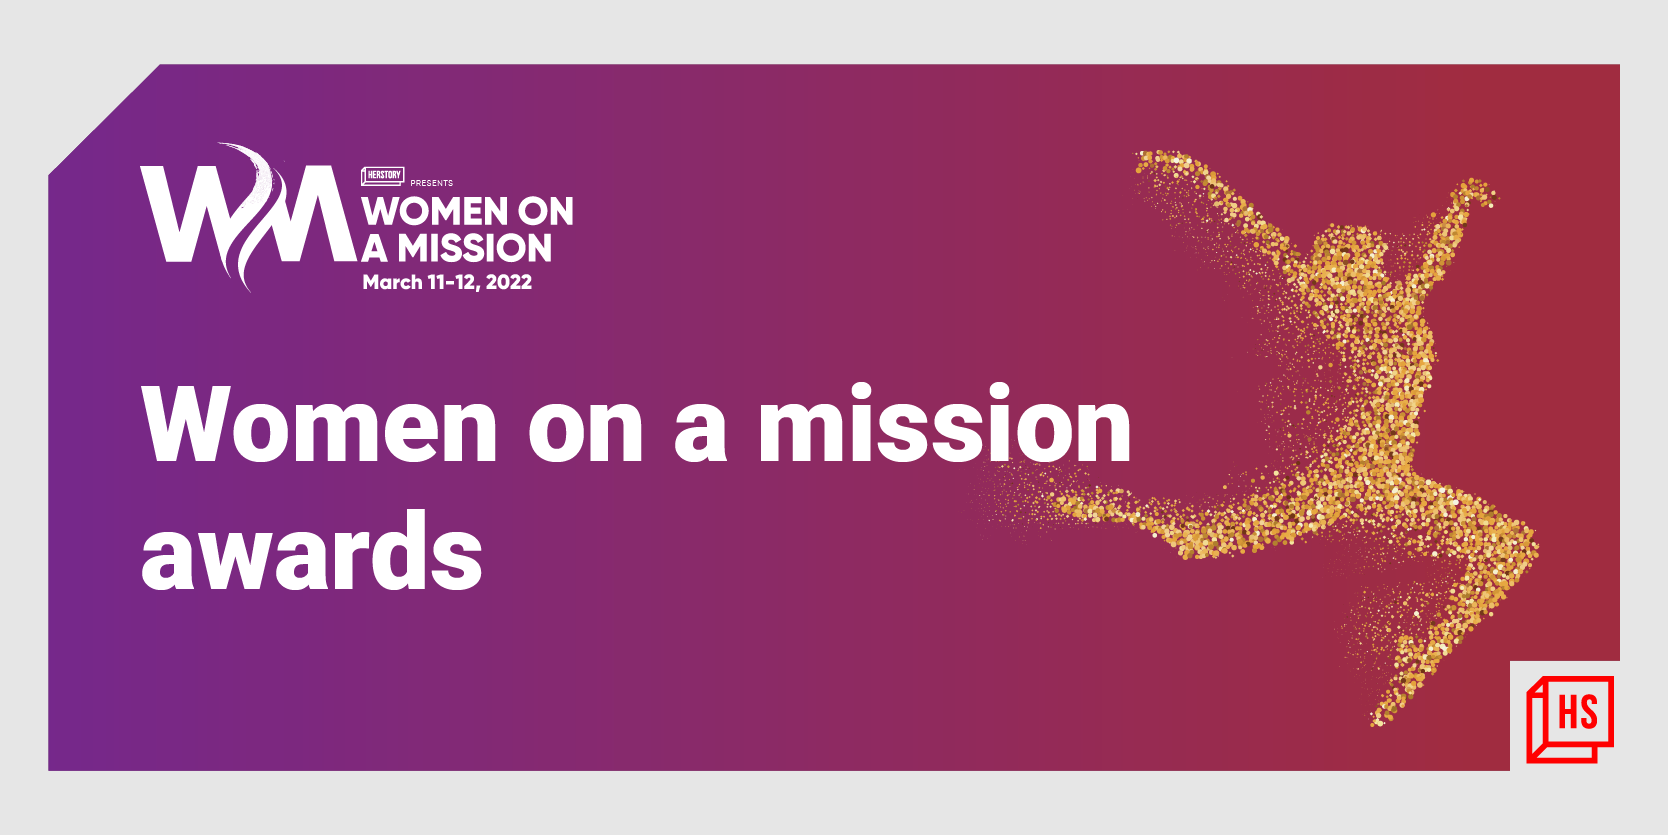 From disruptors to leaders: HerStory’s Women on a Mission Awards 2022 celebrate champions of change

